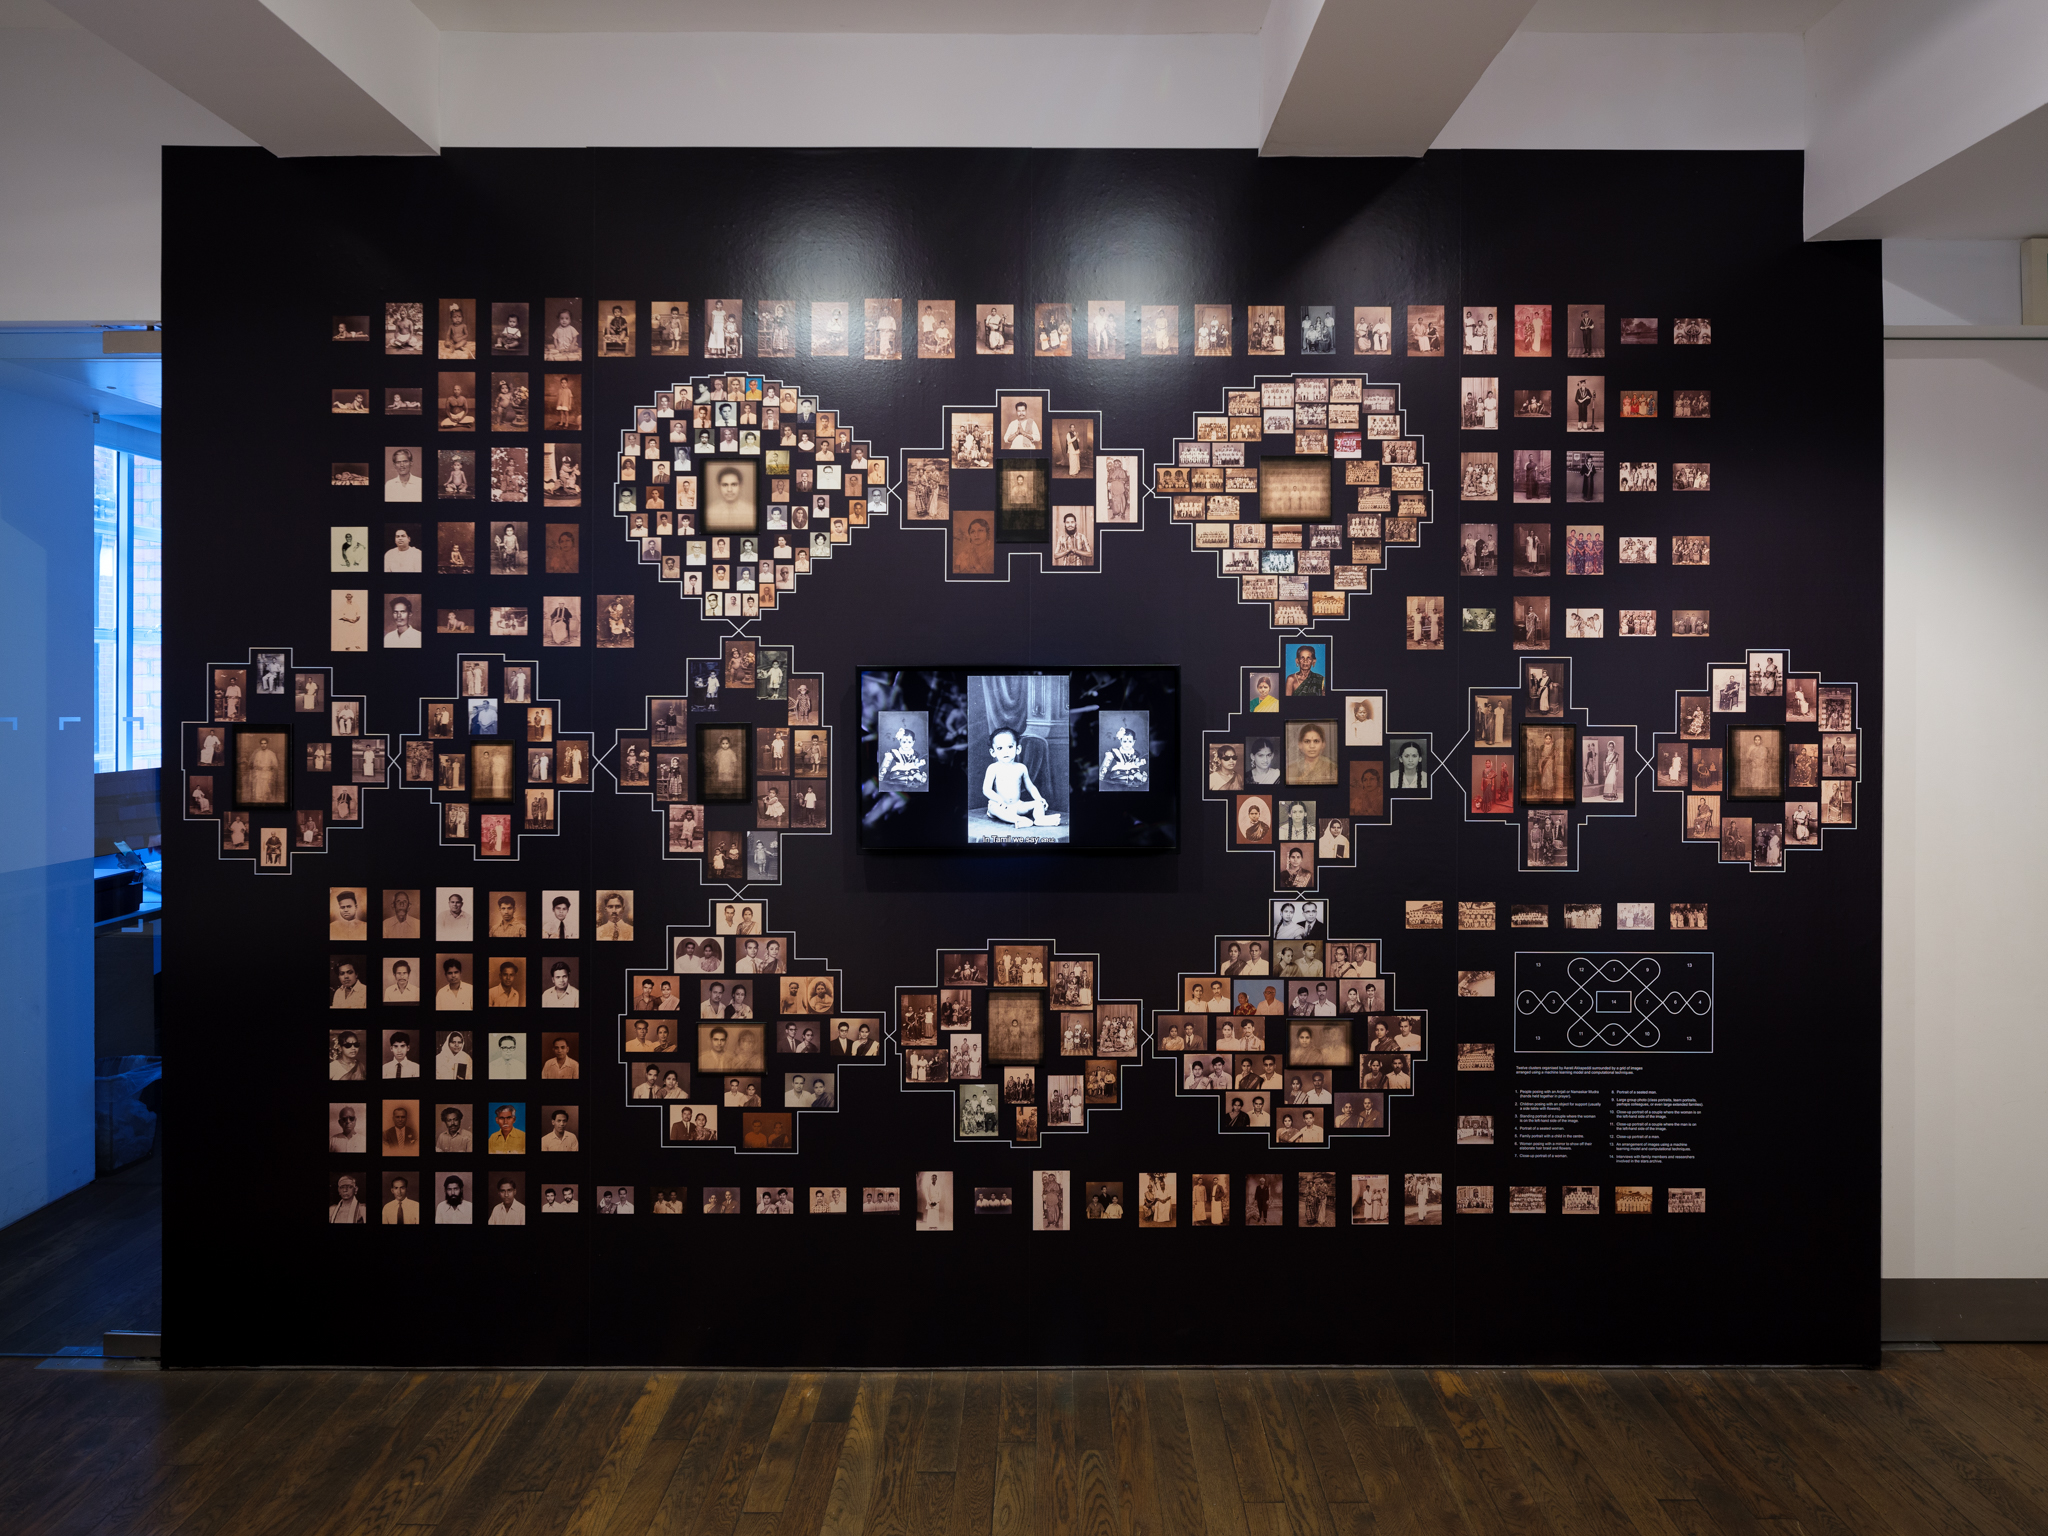 installation view: a large black wall with photographs arranged in a kolam pattern around a video screen.